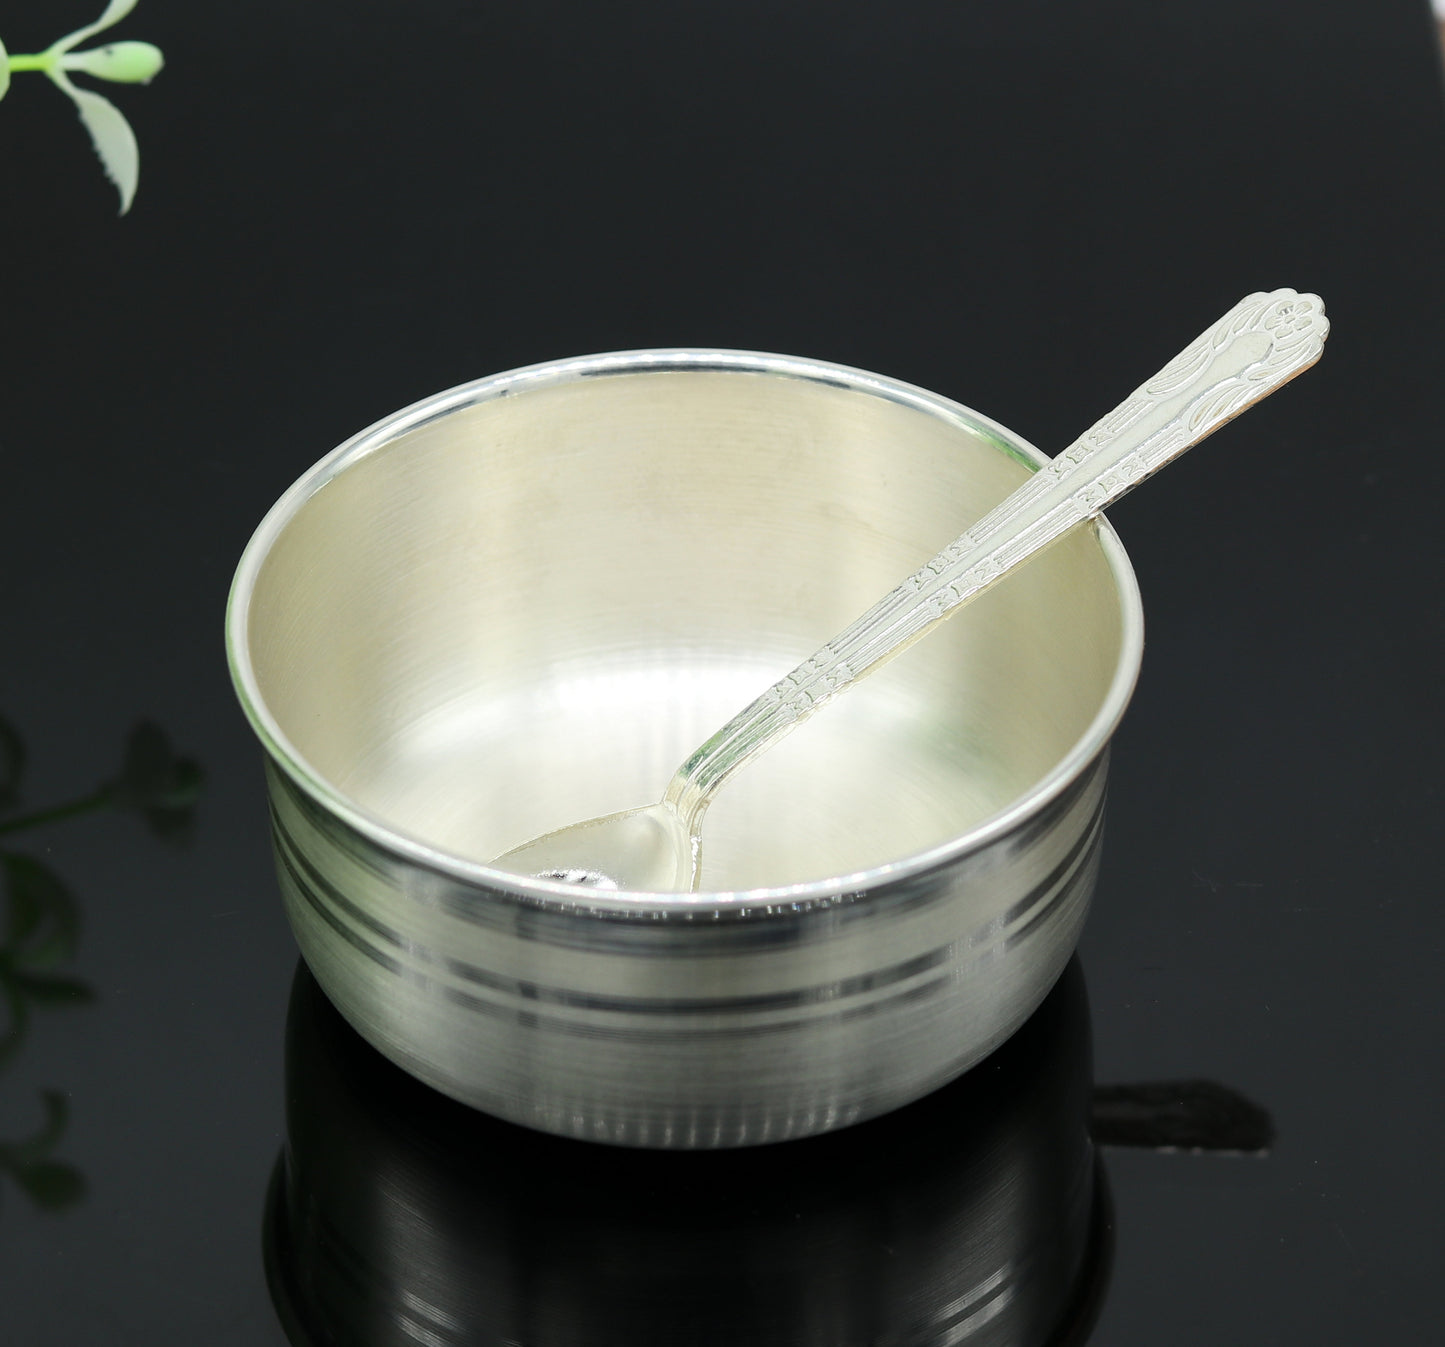 999 pure sterling silver handmade solid silver bowl and spoon, silver has antibacterial properties, stay healthy, silver vessels sv67 - TRIBAL ORNAMENTS